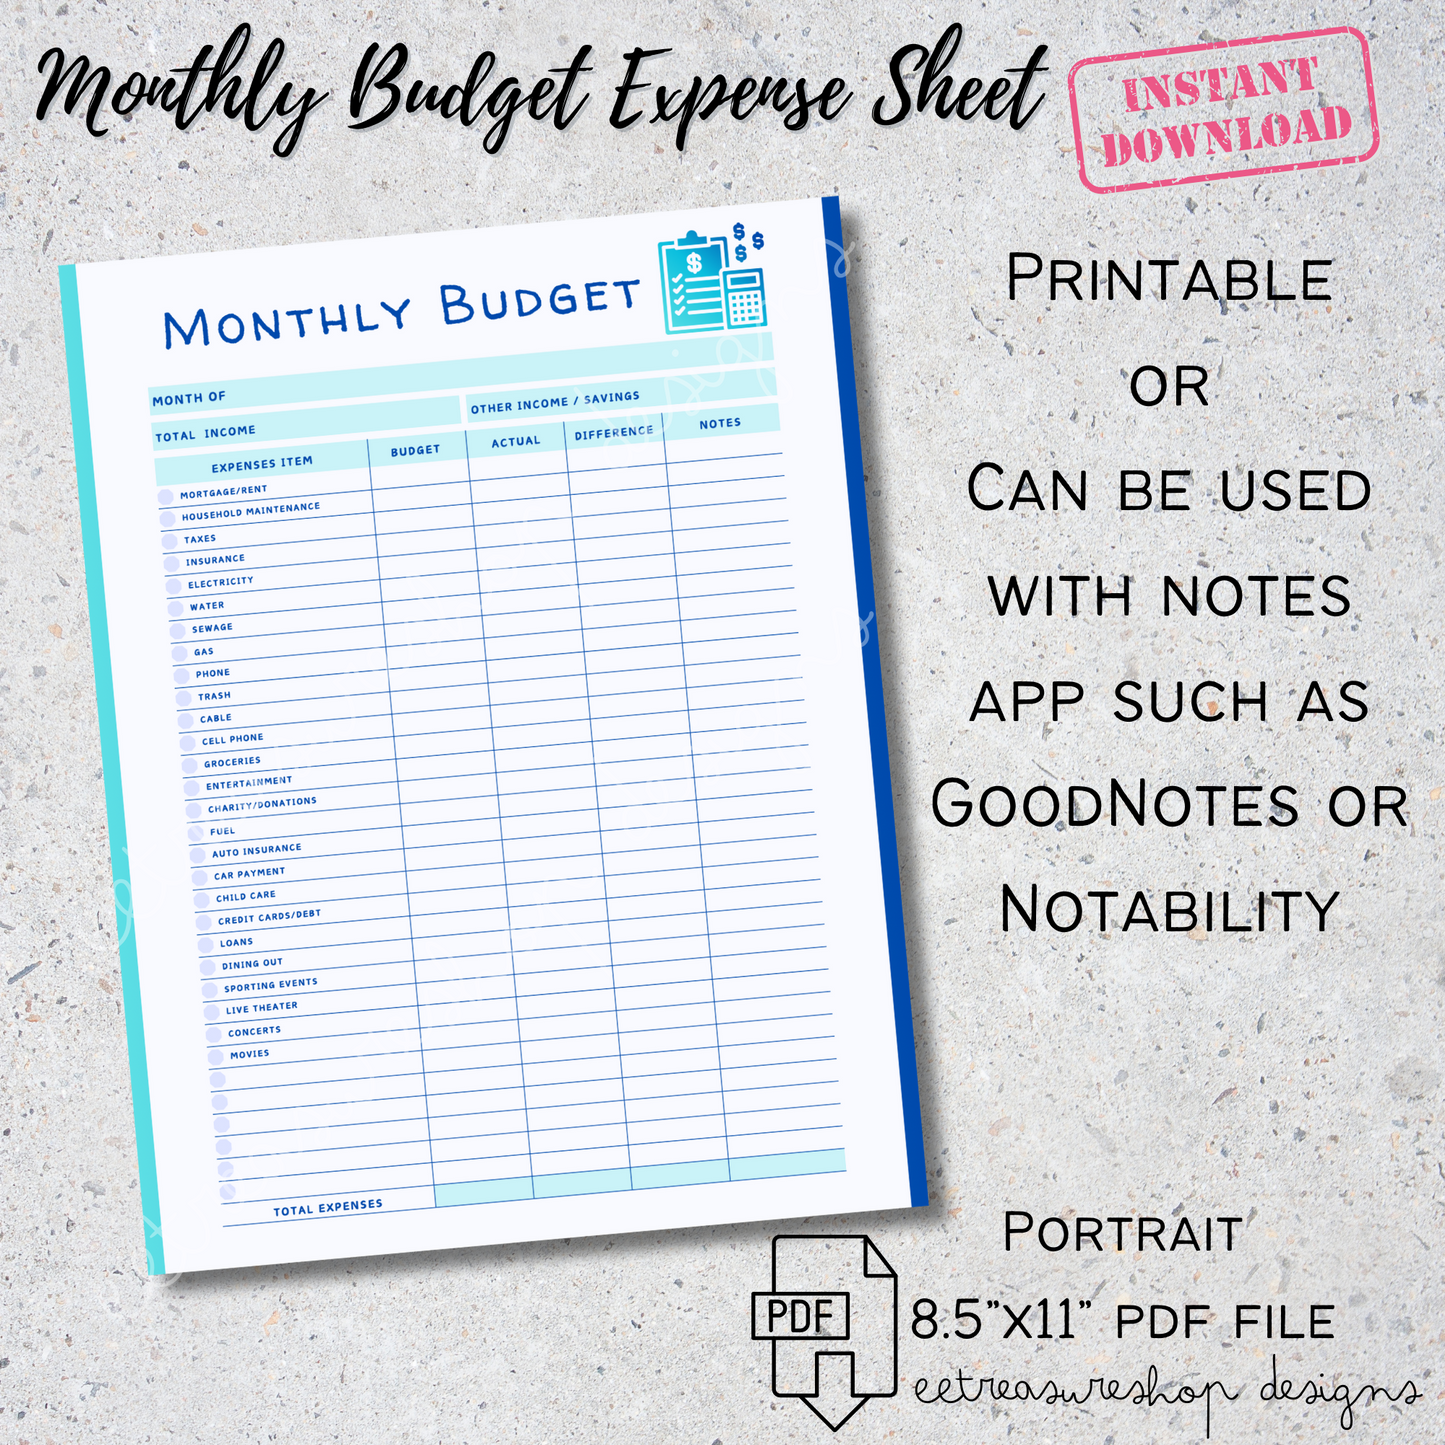 Monthly Budget Expense Sheet Printable PDF, Budget Planner Digital Download, GoodNotes Budget Sheet, iPad Budget Planner